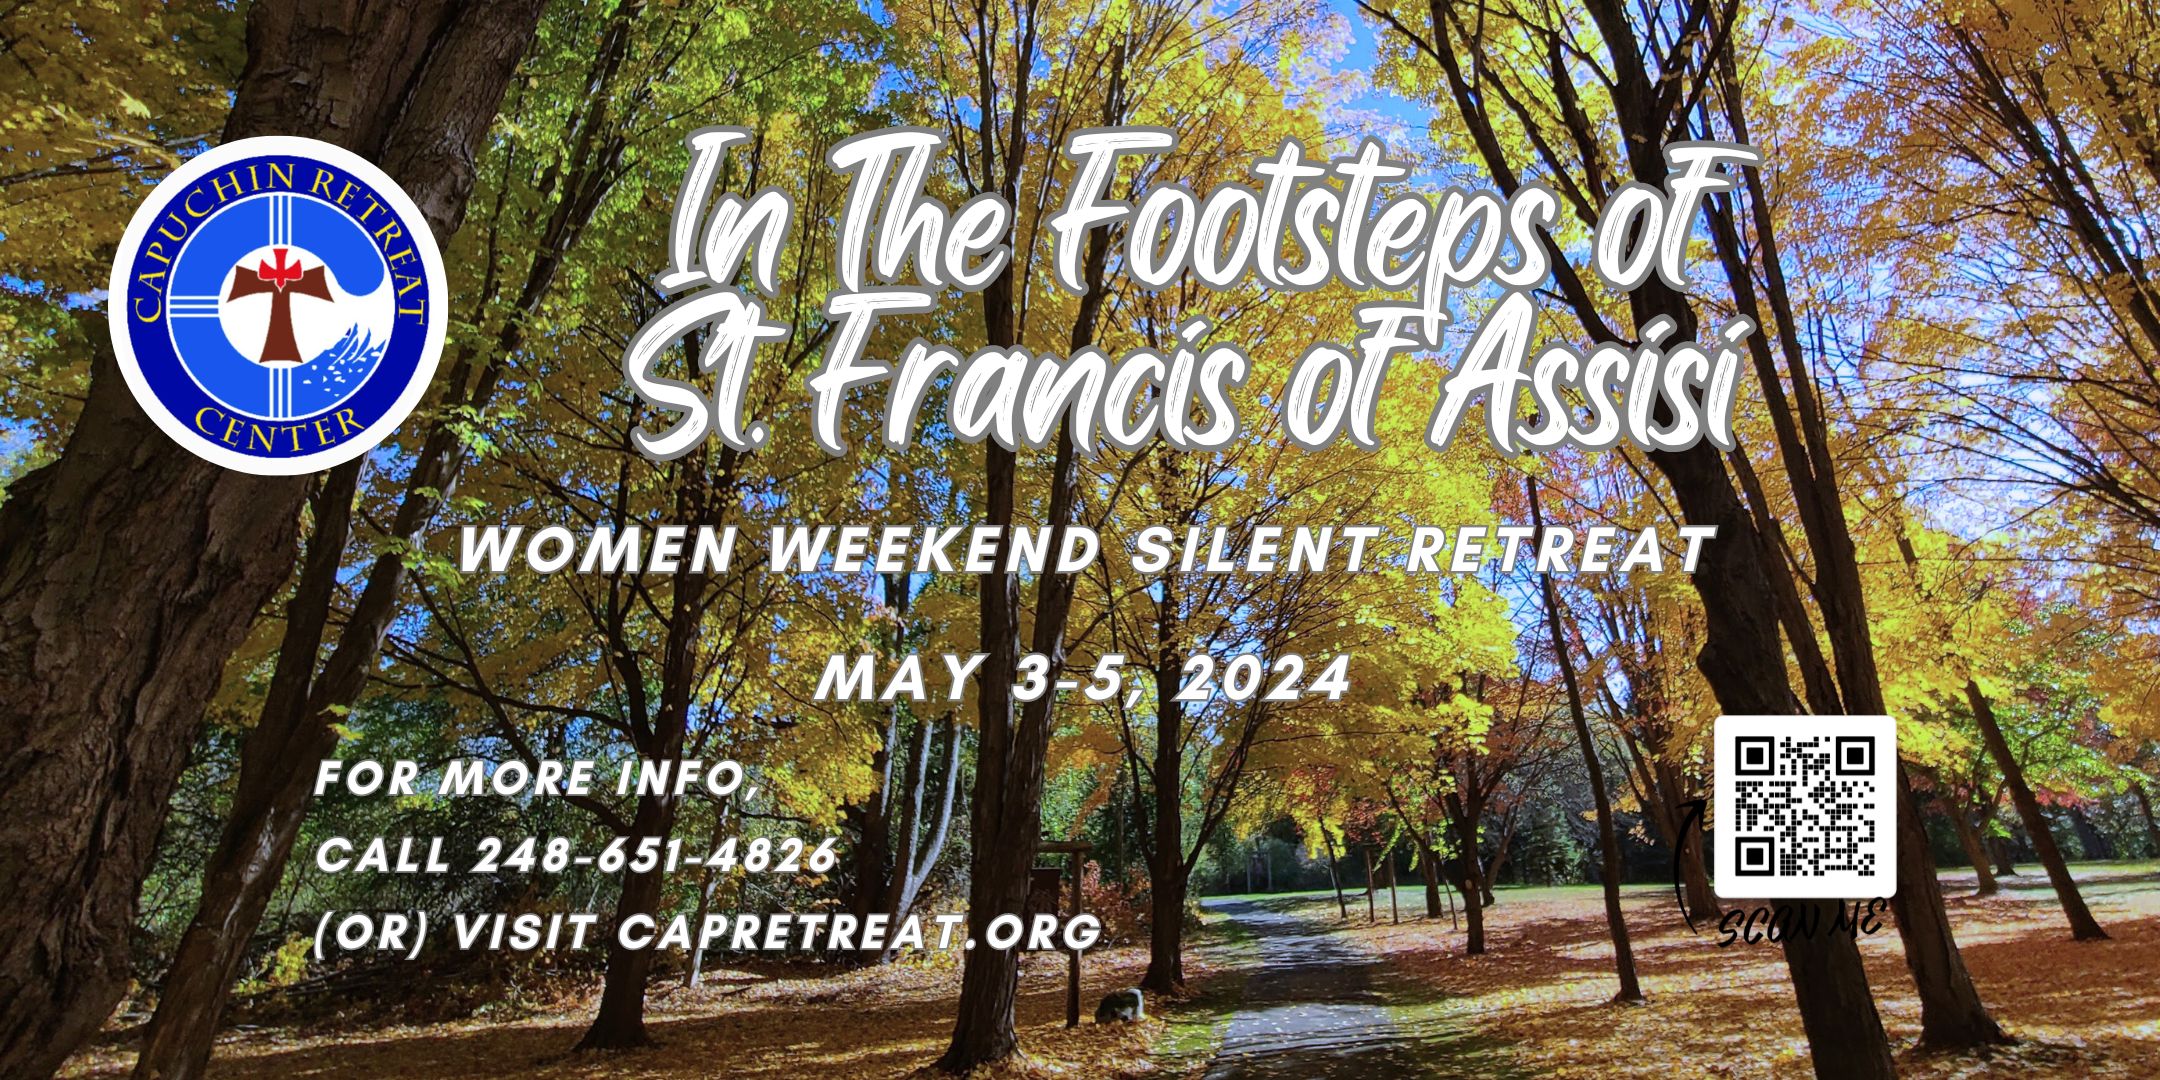 Women Weekend Silent Retreat: “In the Footsteps of St. Francis of Assisi”